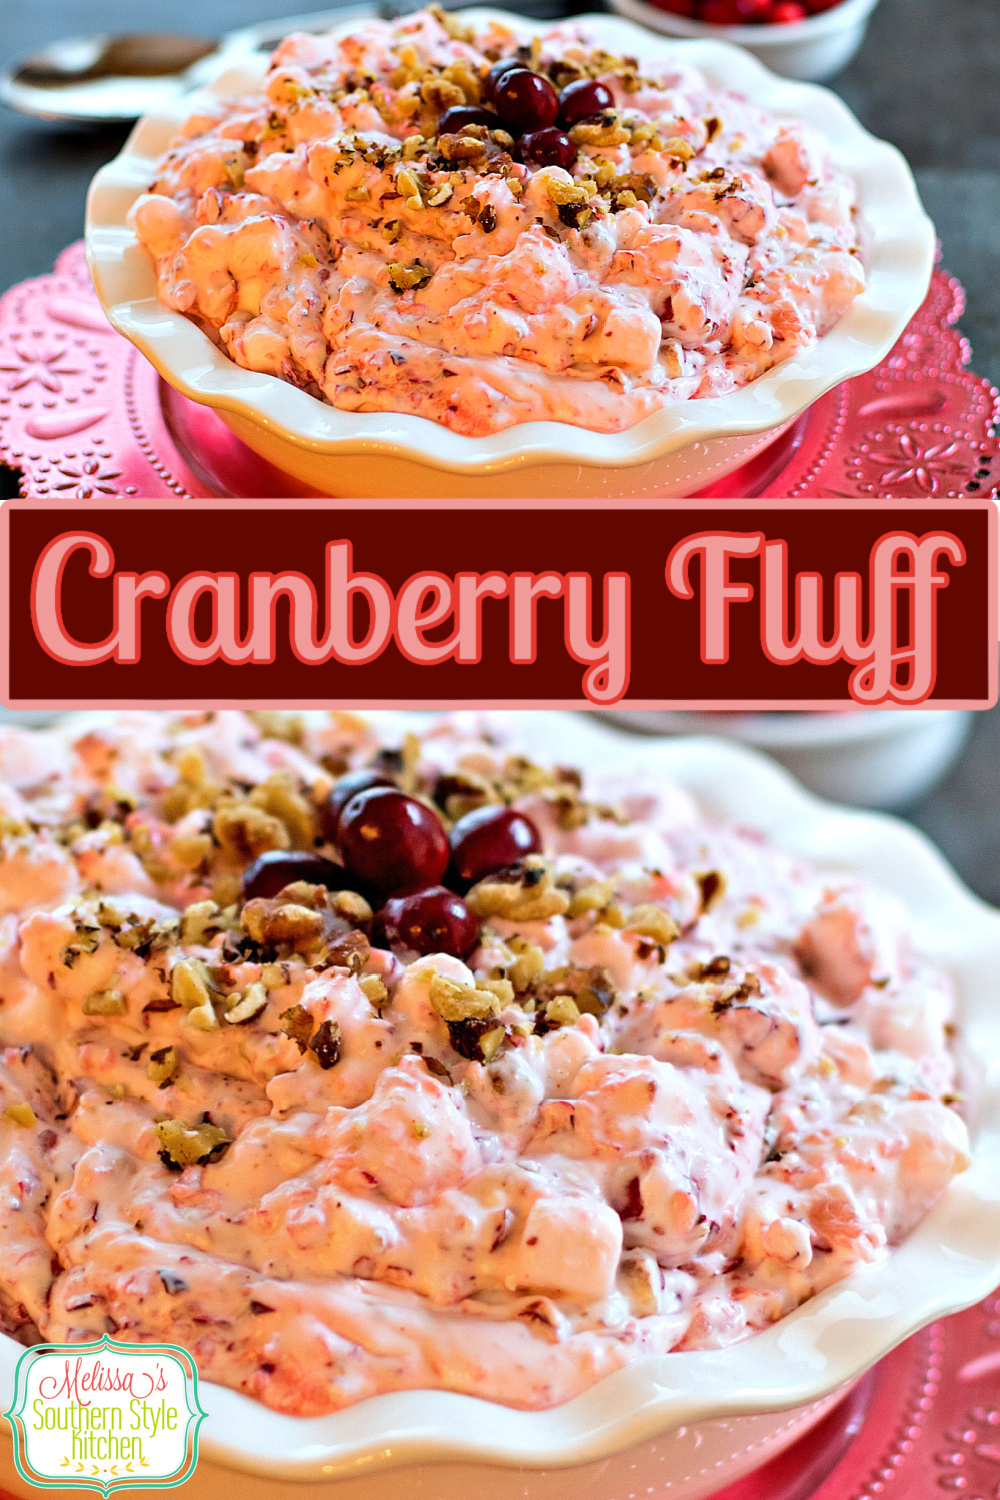 Cranberry Fluff is the ideal quick sweet fix for the holiday season #cranberryfluff #cranberries #cranberryrecipes #thanksgiving #christmasrecipes #holidaysidedishrecipes #desserts #dessertfoodrecipes #easyrecipes ##cranberry #southernfood #southernrecipes via @melissasssk